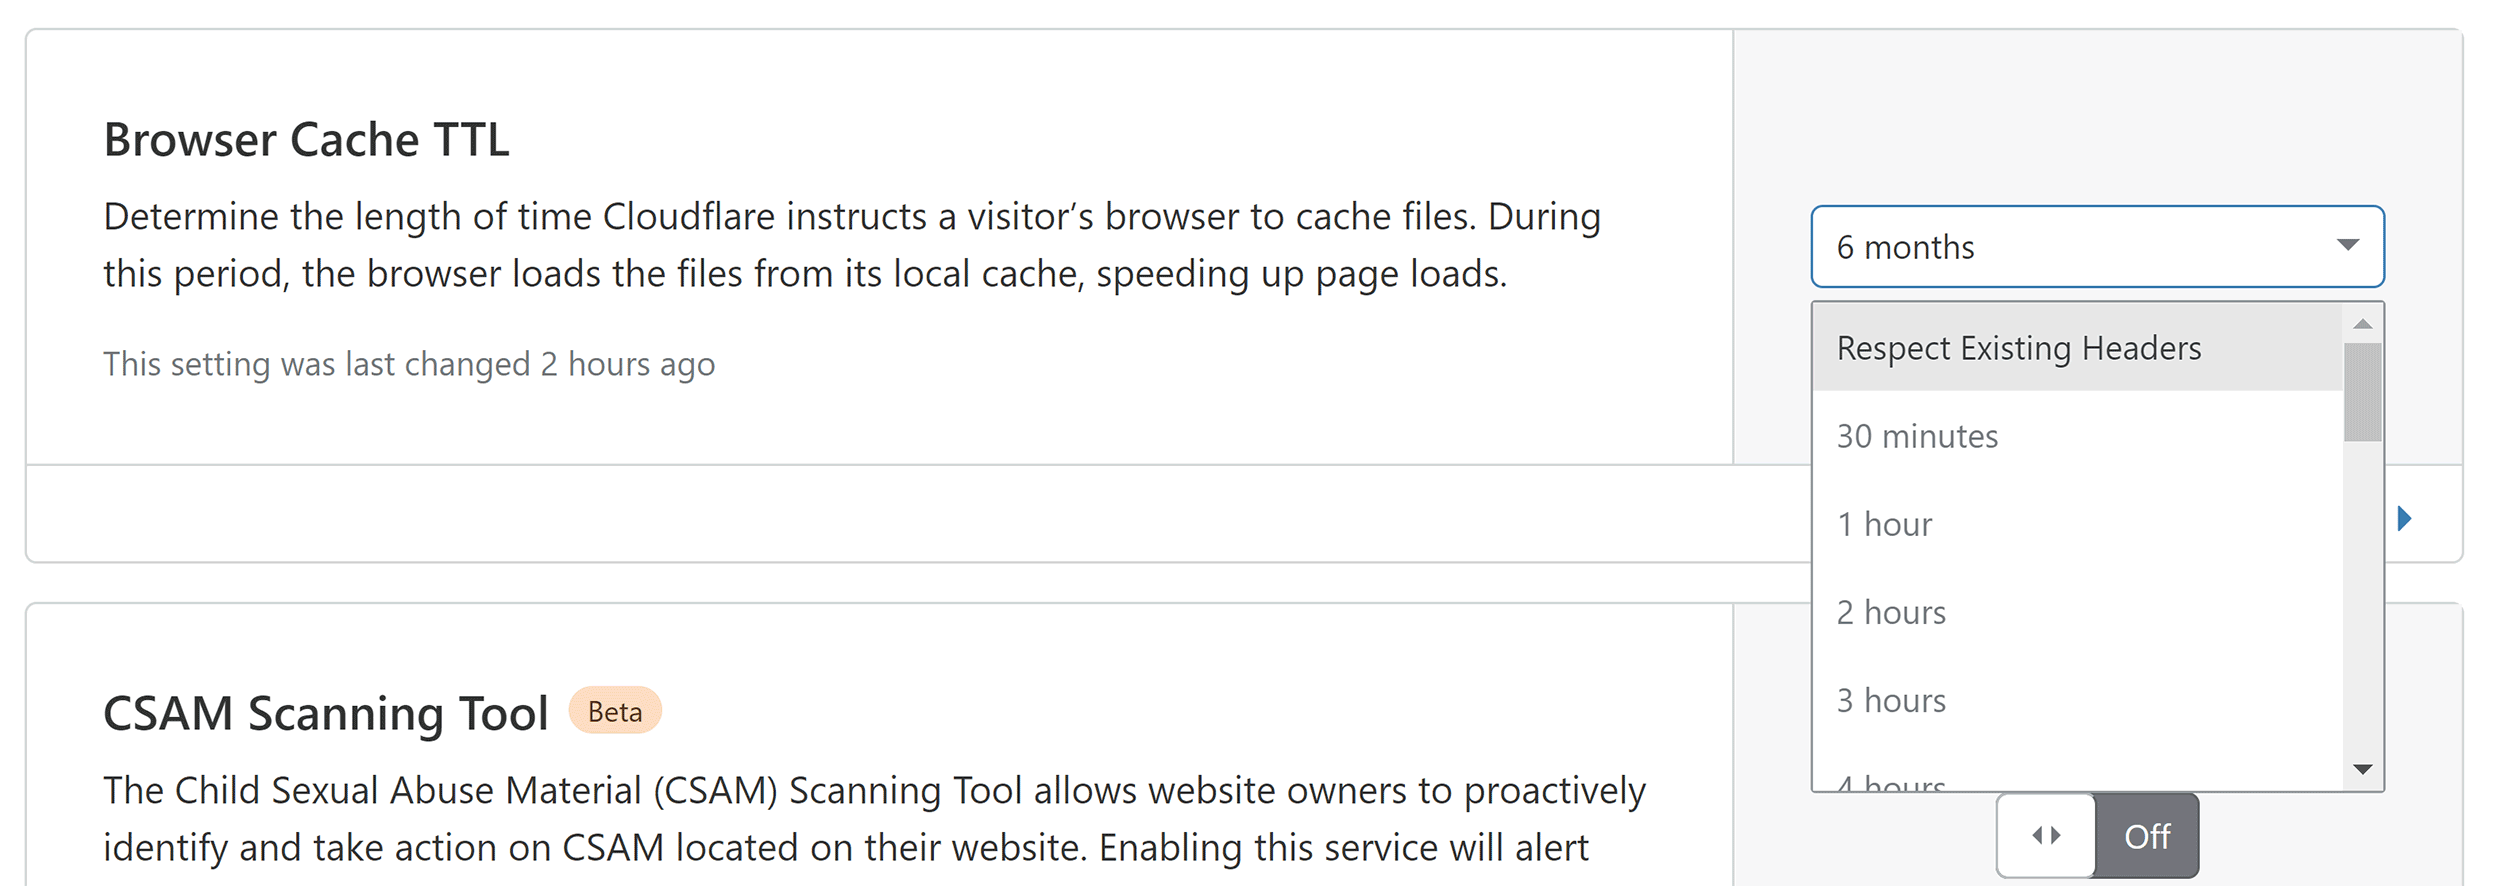 Cloudflare Browser Cache CCL